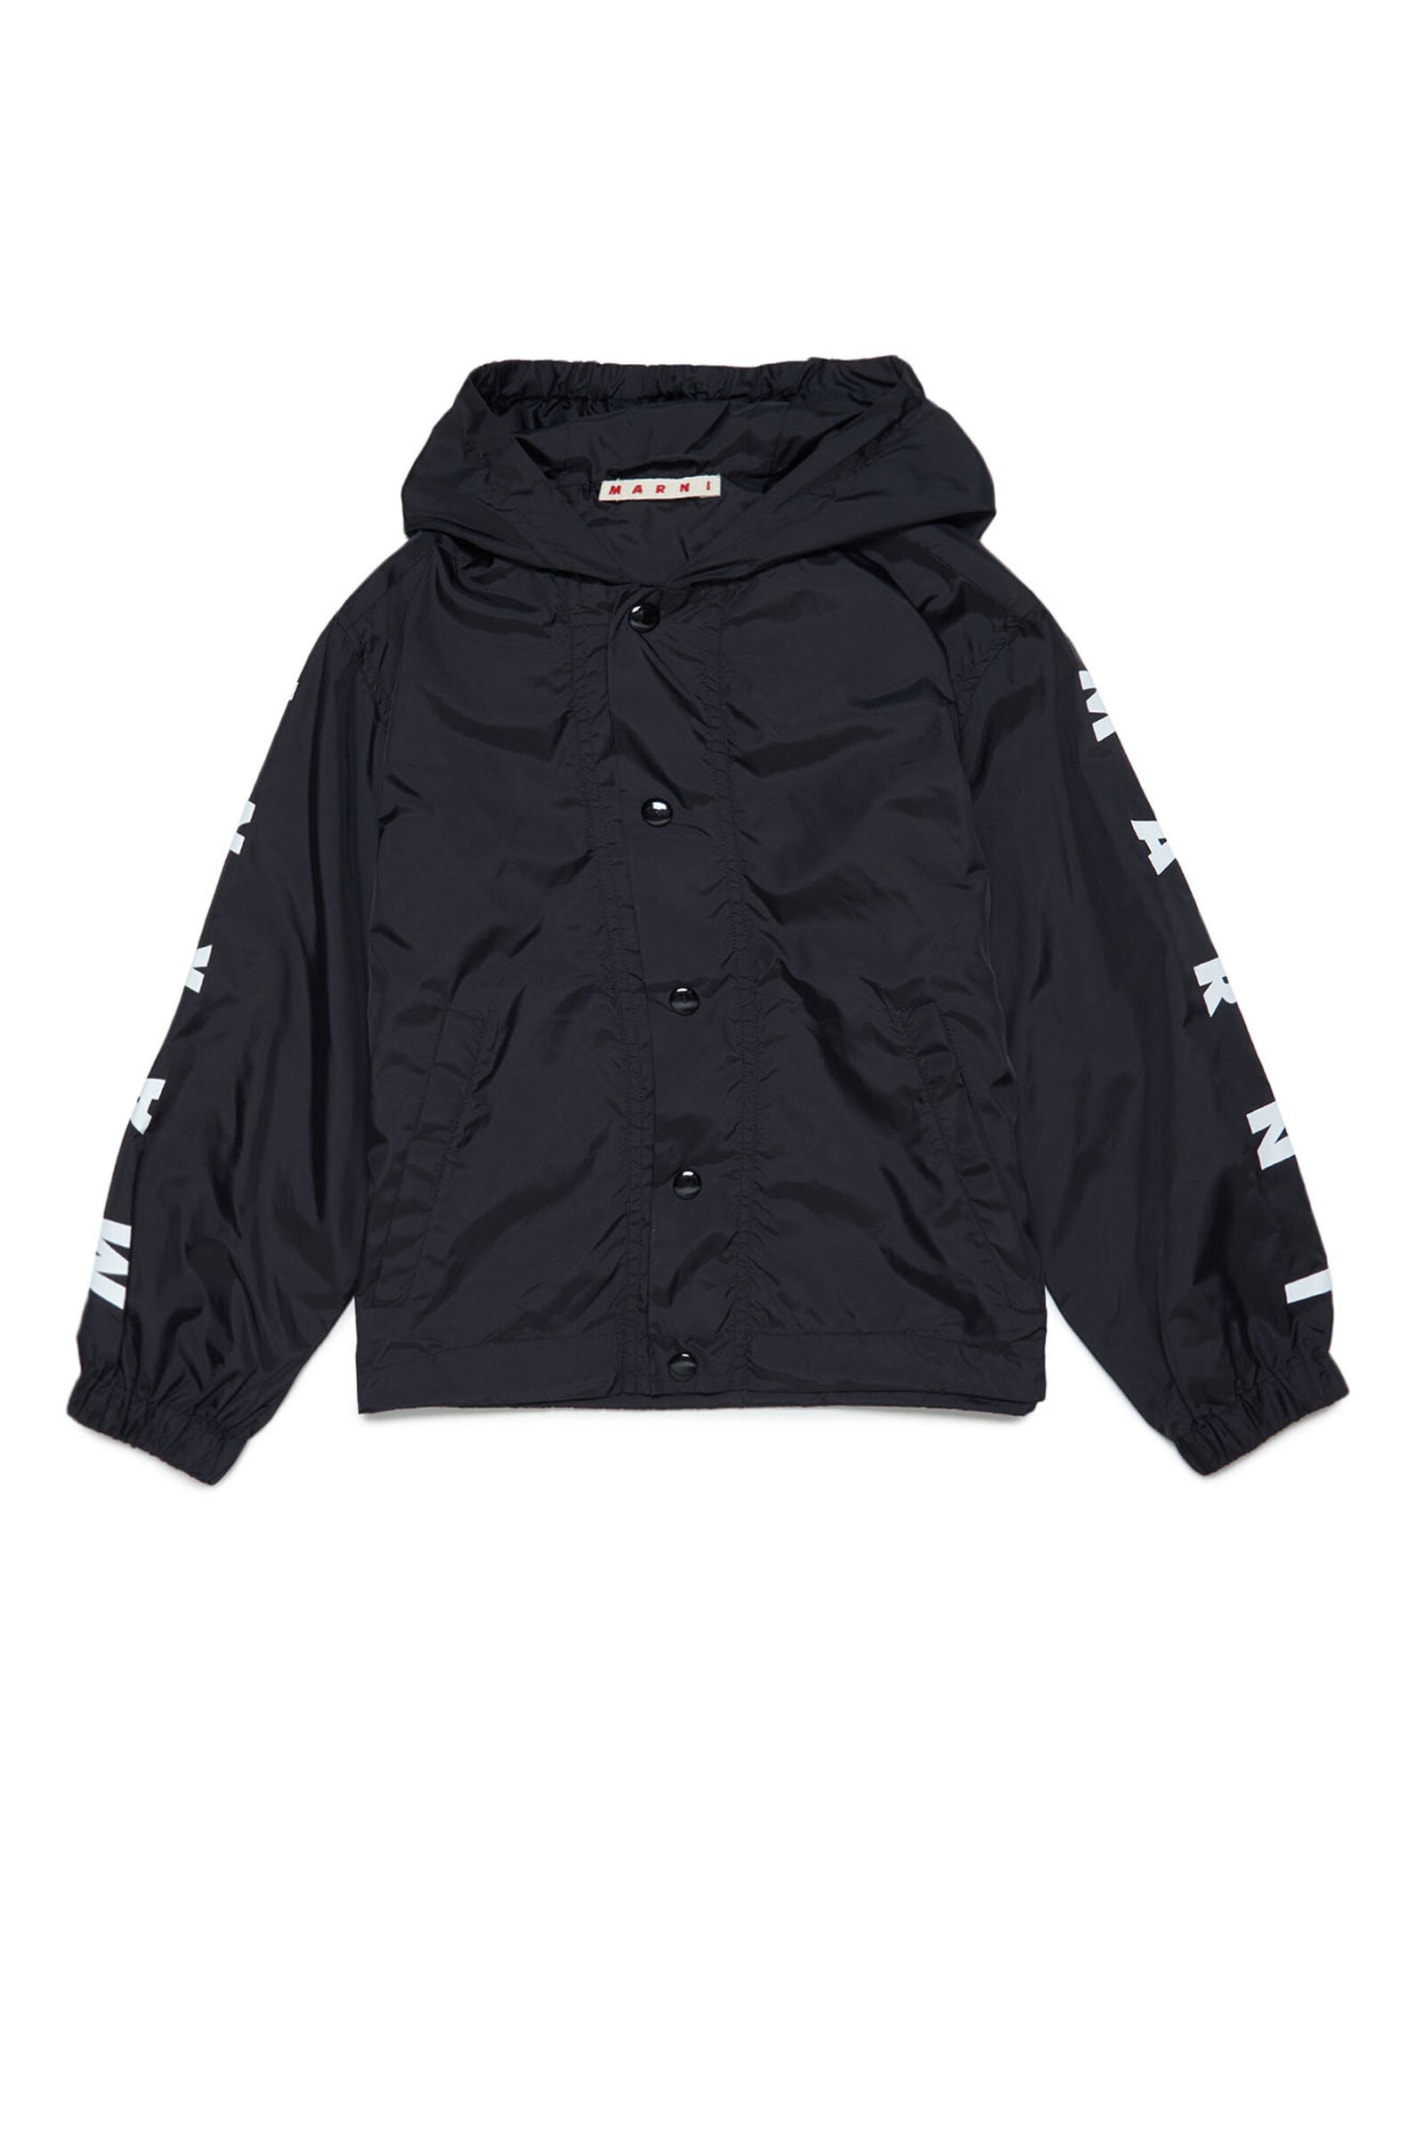 MARNI MJ13U JACKET MARNI BLACK WATERPROOF HOODED JACKET WITH BUTTON FASTENING AND LOGO ON THE SLEEVES